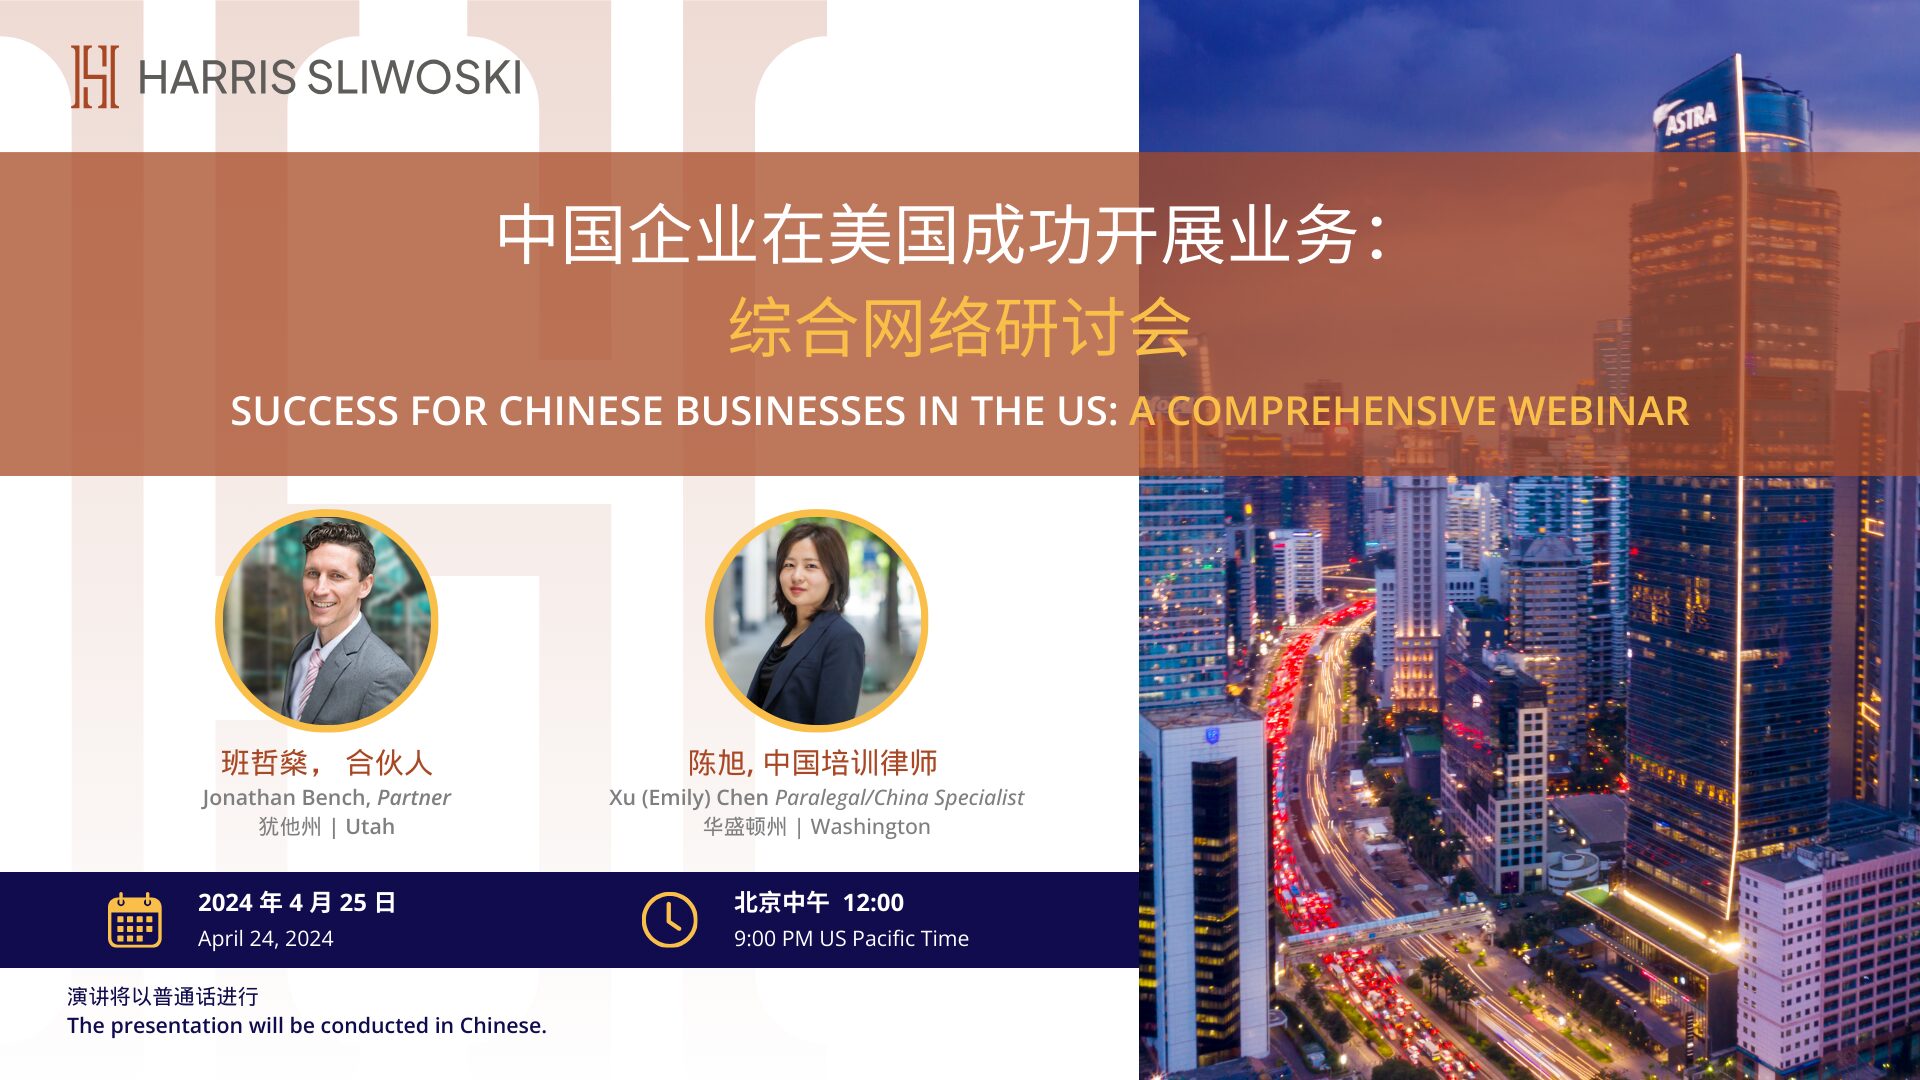 Success for Chinese businesses in the US